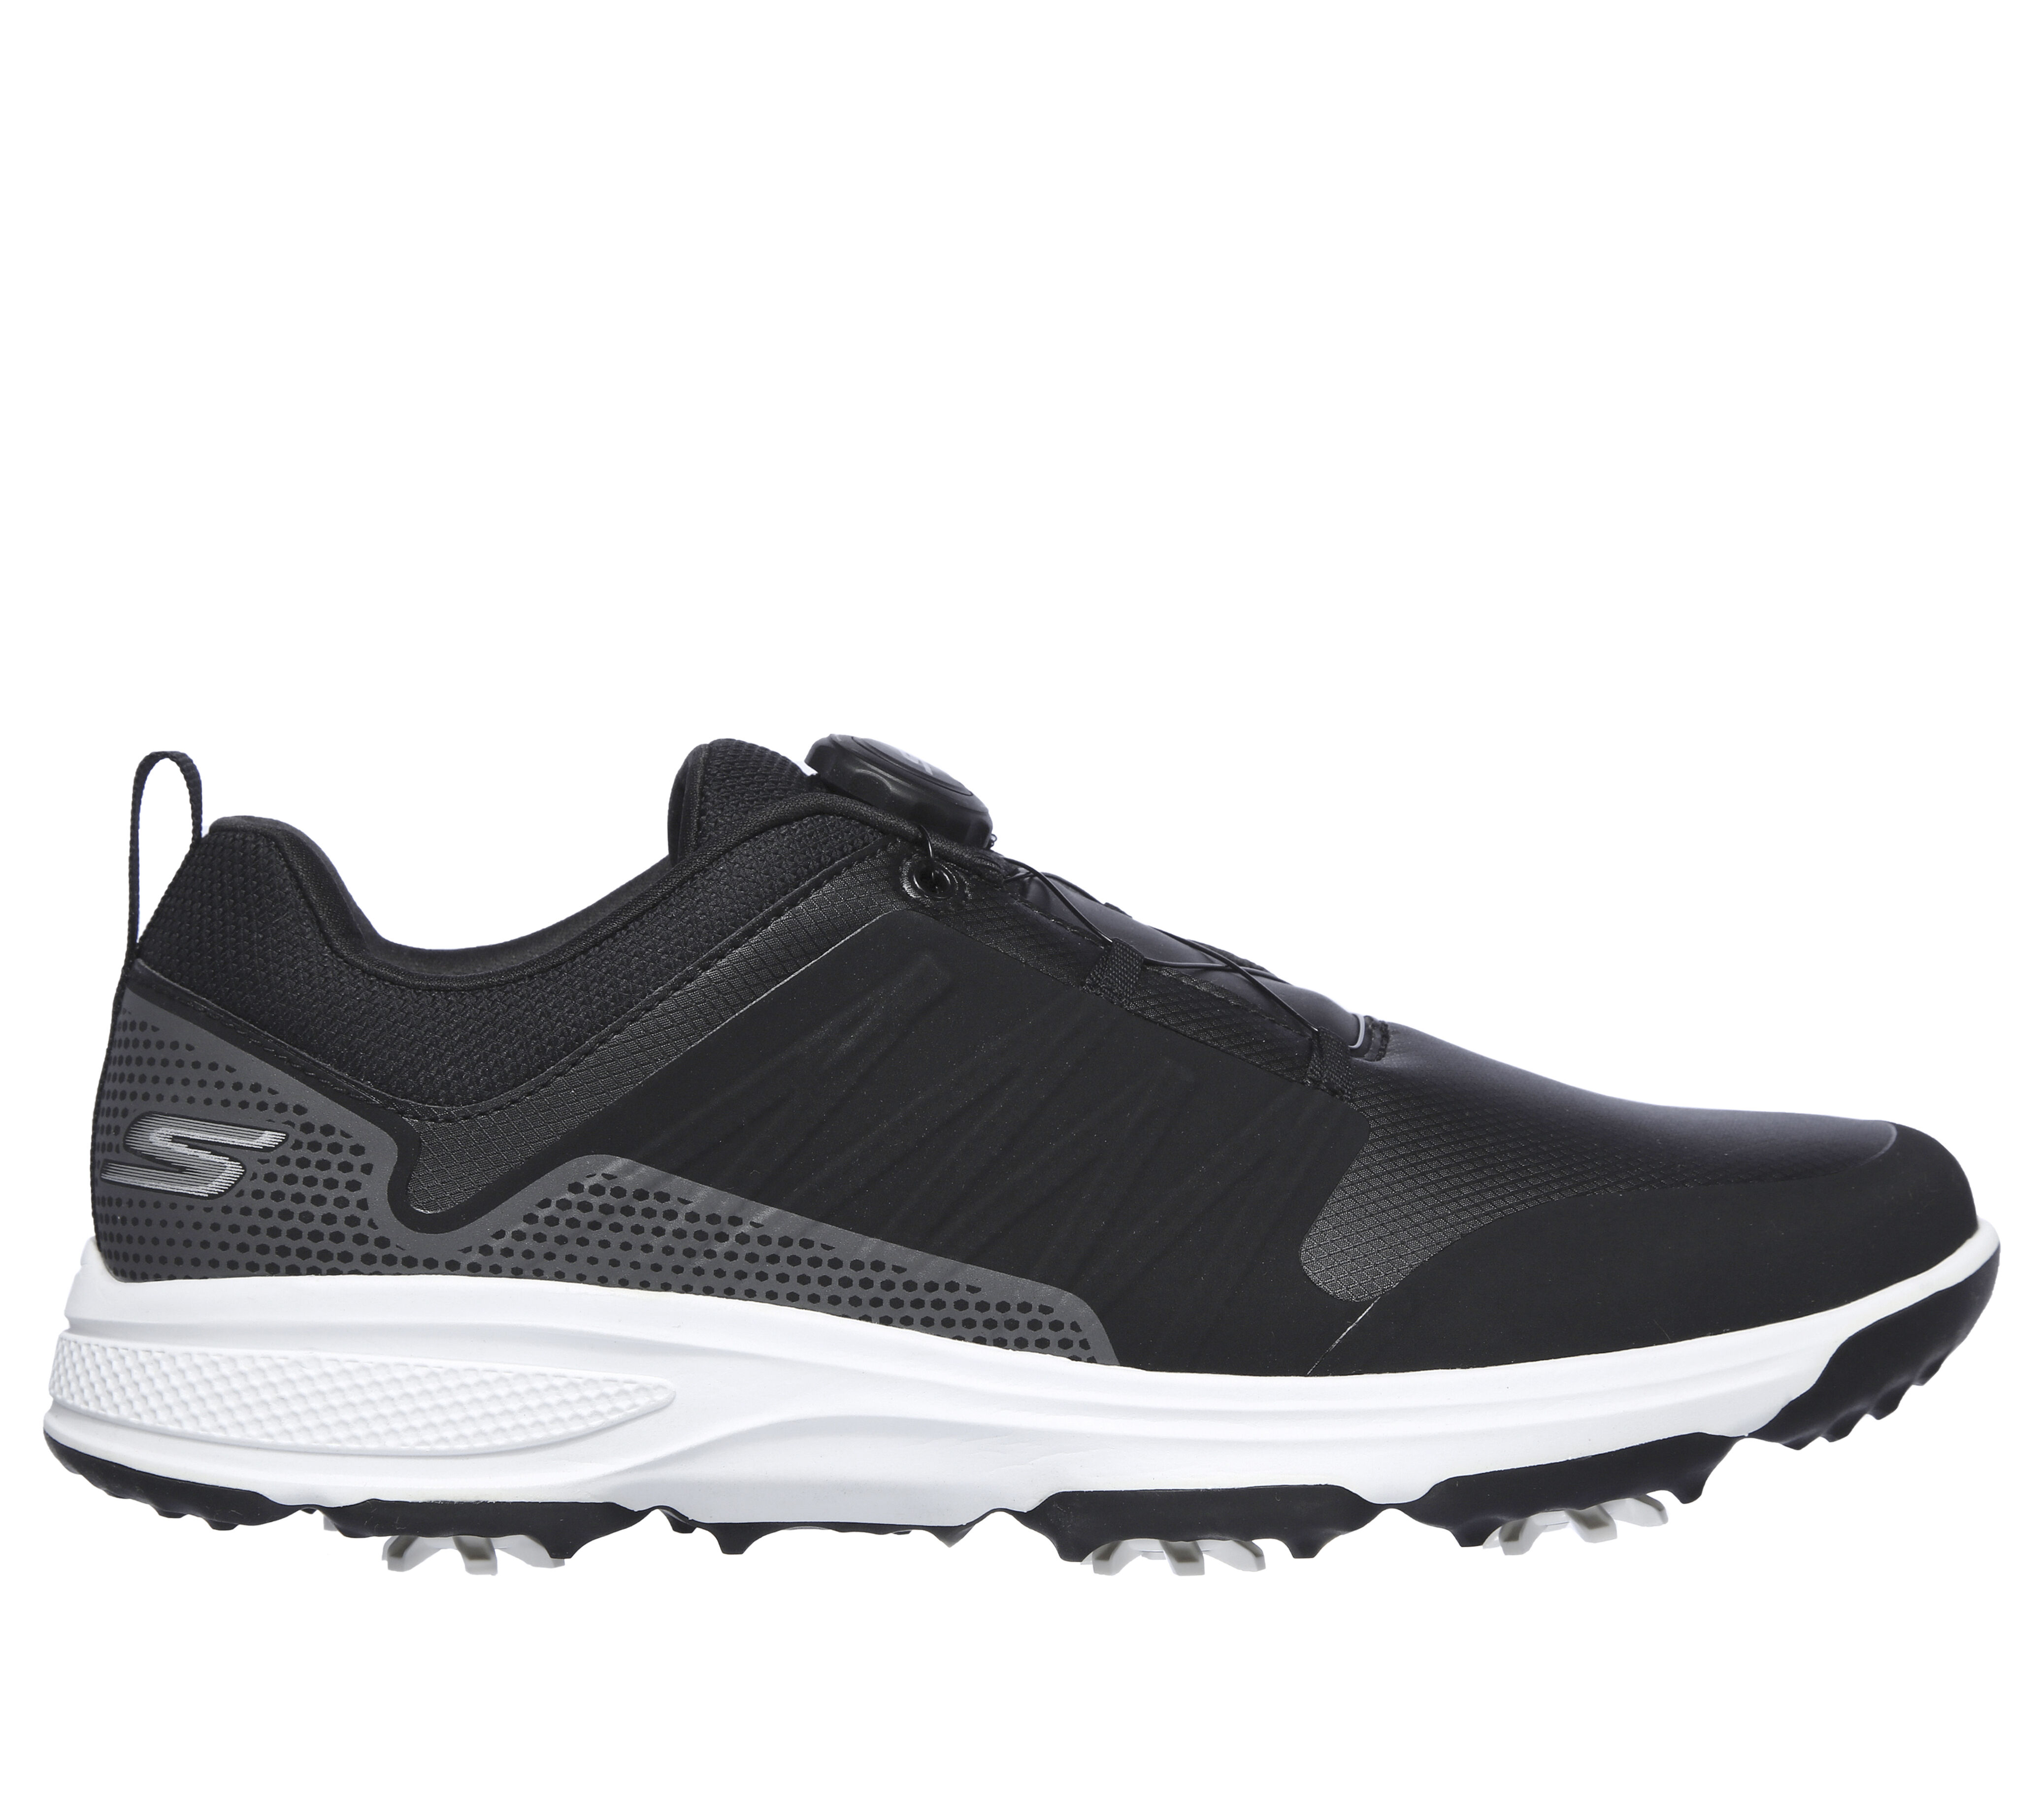 skechers golf shoes usa